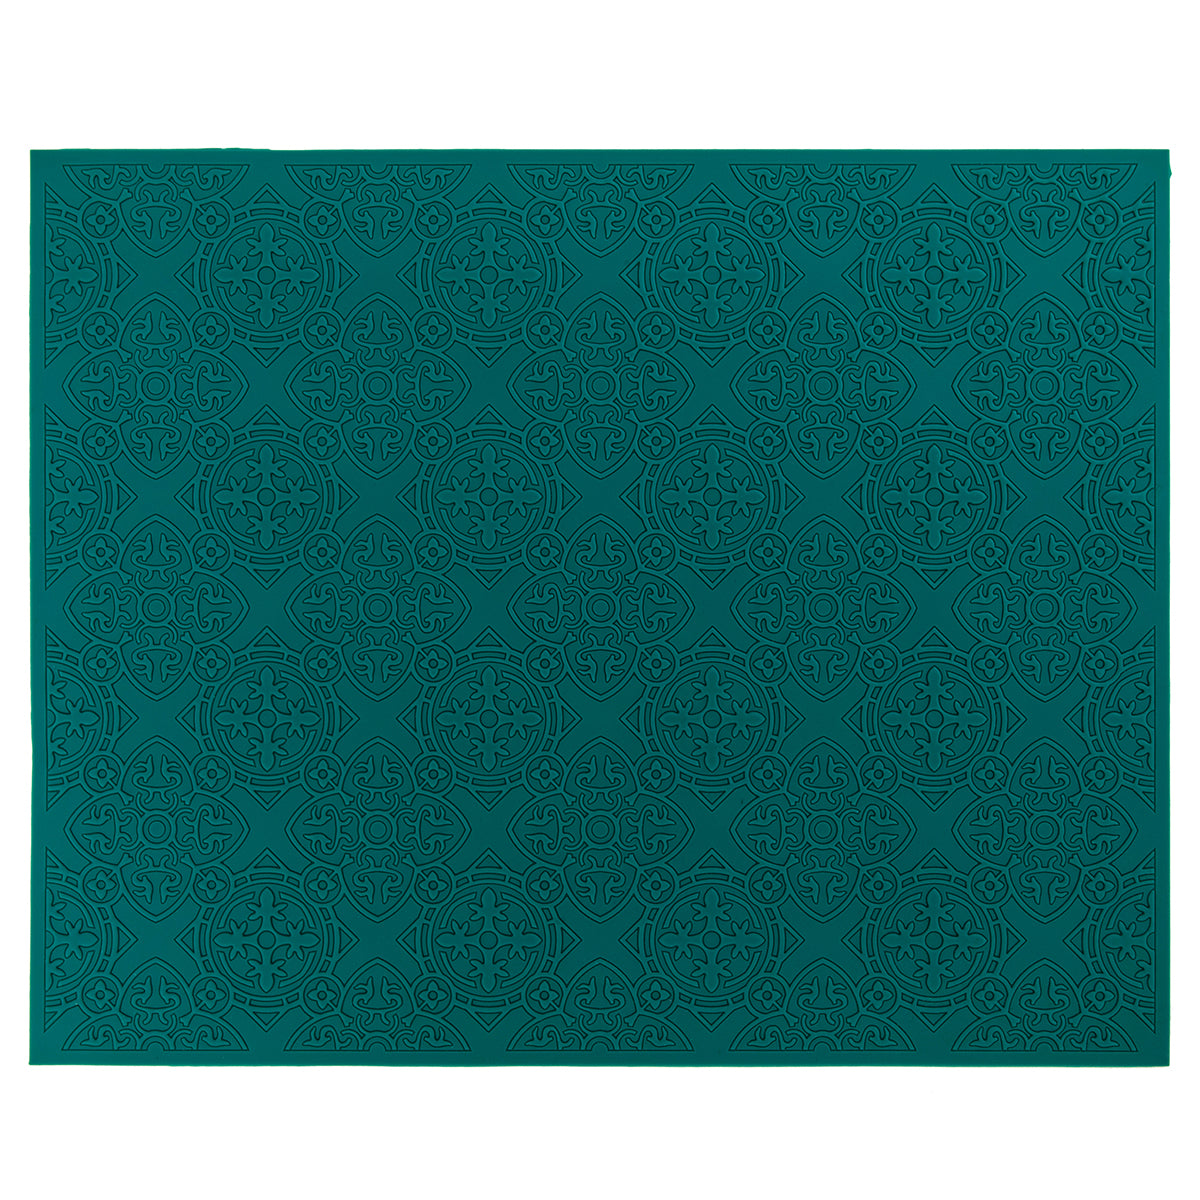 Shop The Latest Collection Of Images D'Orient Placemat Urban Teal - Pla-400071 In Lebanon